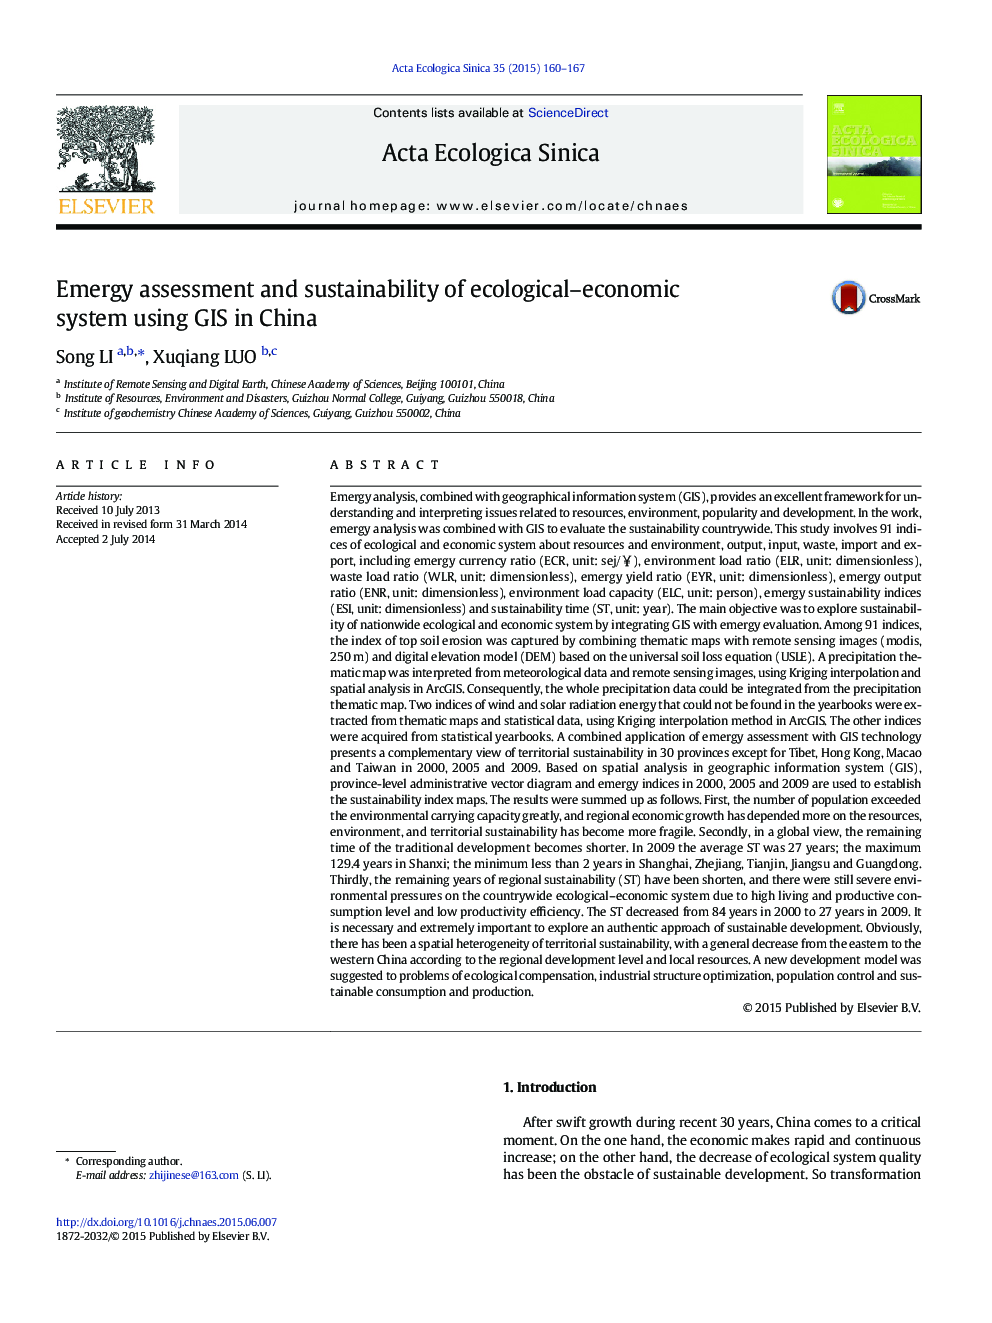 Emergy assessment and sustainability of ecological–economic system using GIS in China